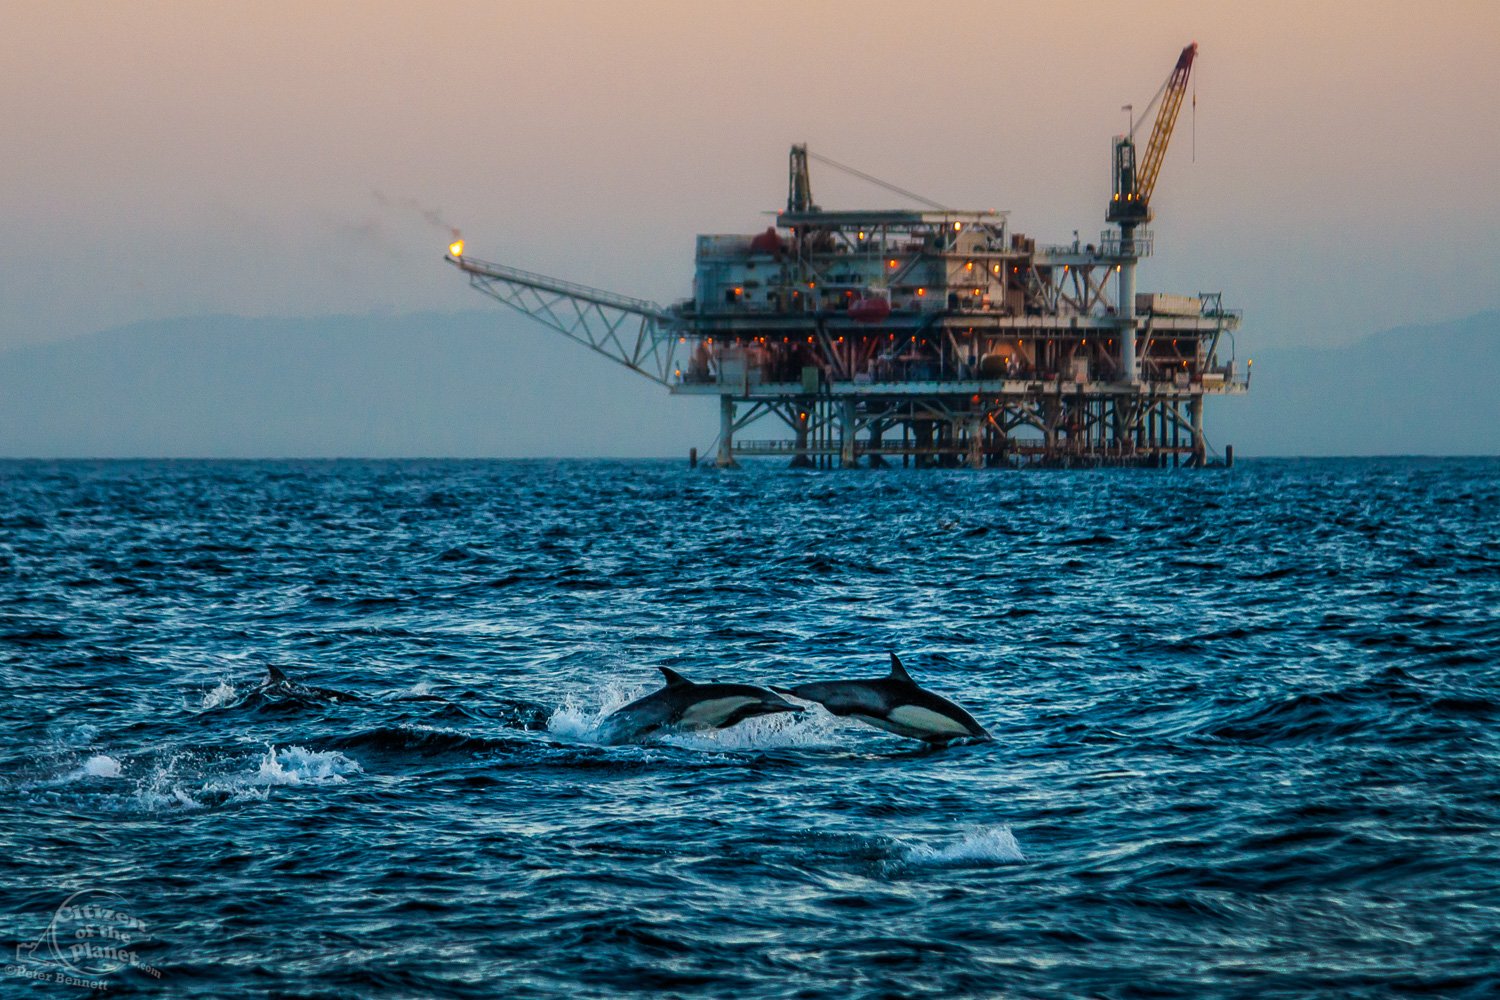  A pod of Dolphins leap out of the water in the shadow of an oil derrick in the Catalina Channel off Long Beach. 